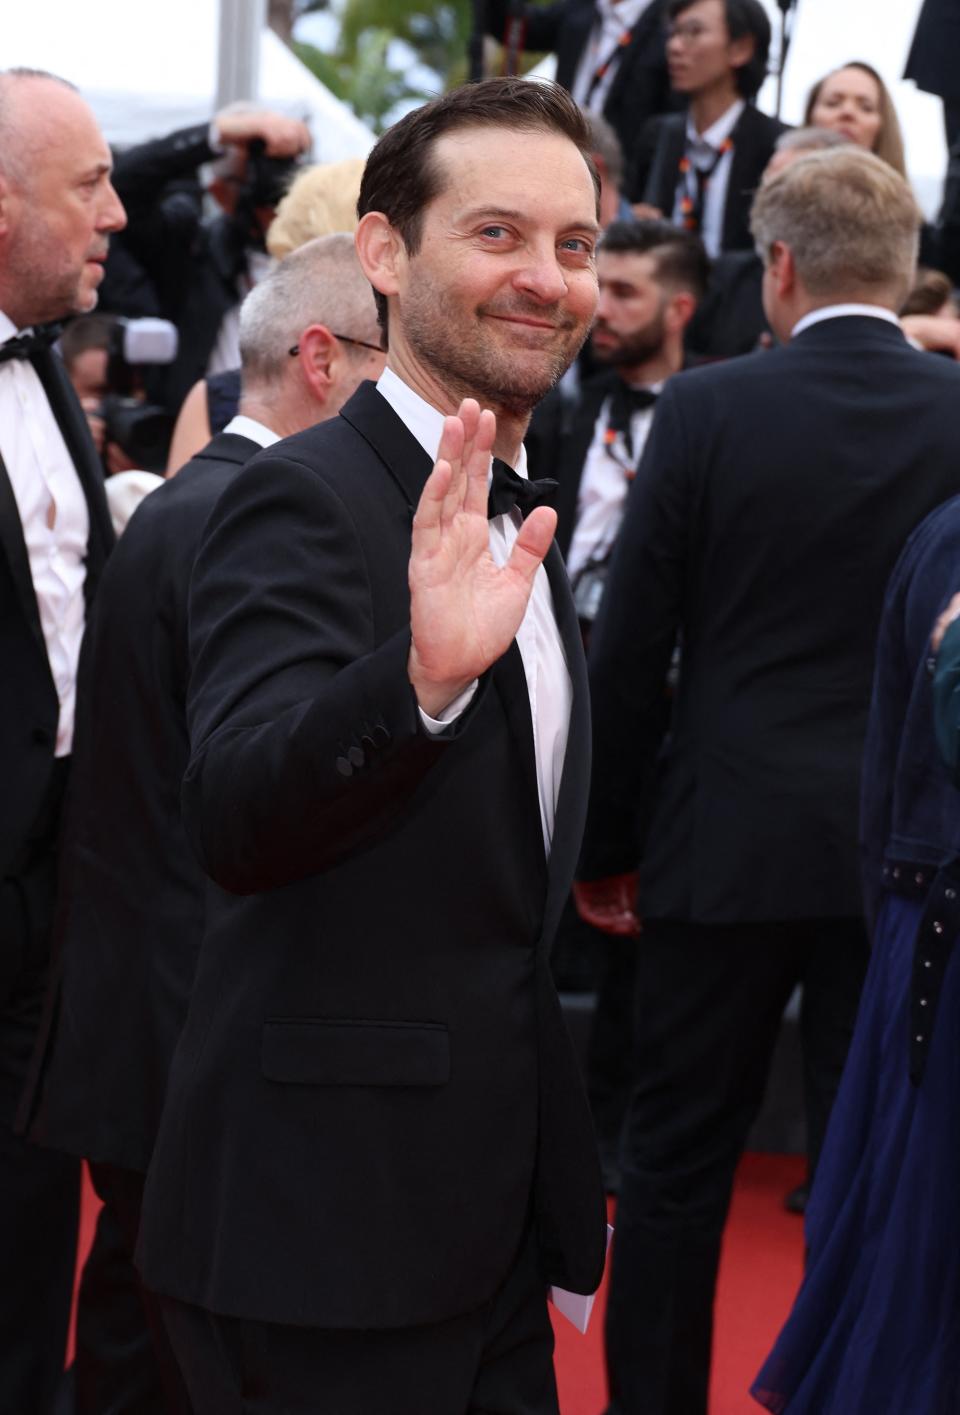 Toni Garrn attends the "Killers Of The Flower Moon" red carpet at the 76th annual Cannes film festival at Palais des Festivals on May 20, 2023 in Cannes, France. 20 May 2023 Pictured: Tobey Maguire. Photo credit: DGP/imageSPACE / MEGA TheMegaAgency.com +1 888 505 6342 (Mega Agency TagID: MEGA984718_033.jpg) [Photo via Mega Agency]